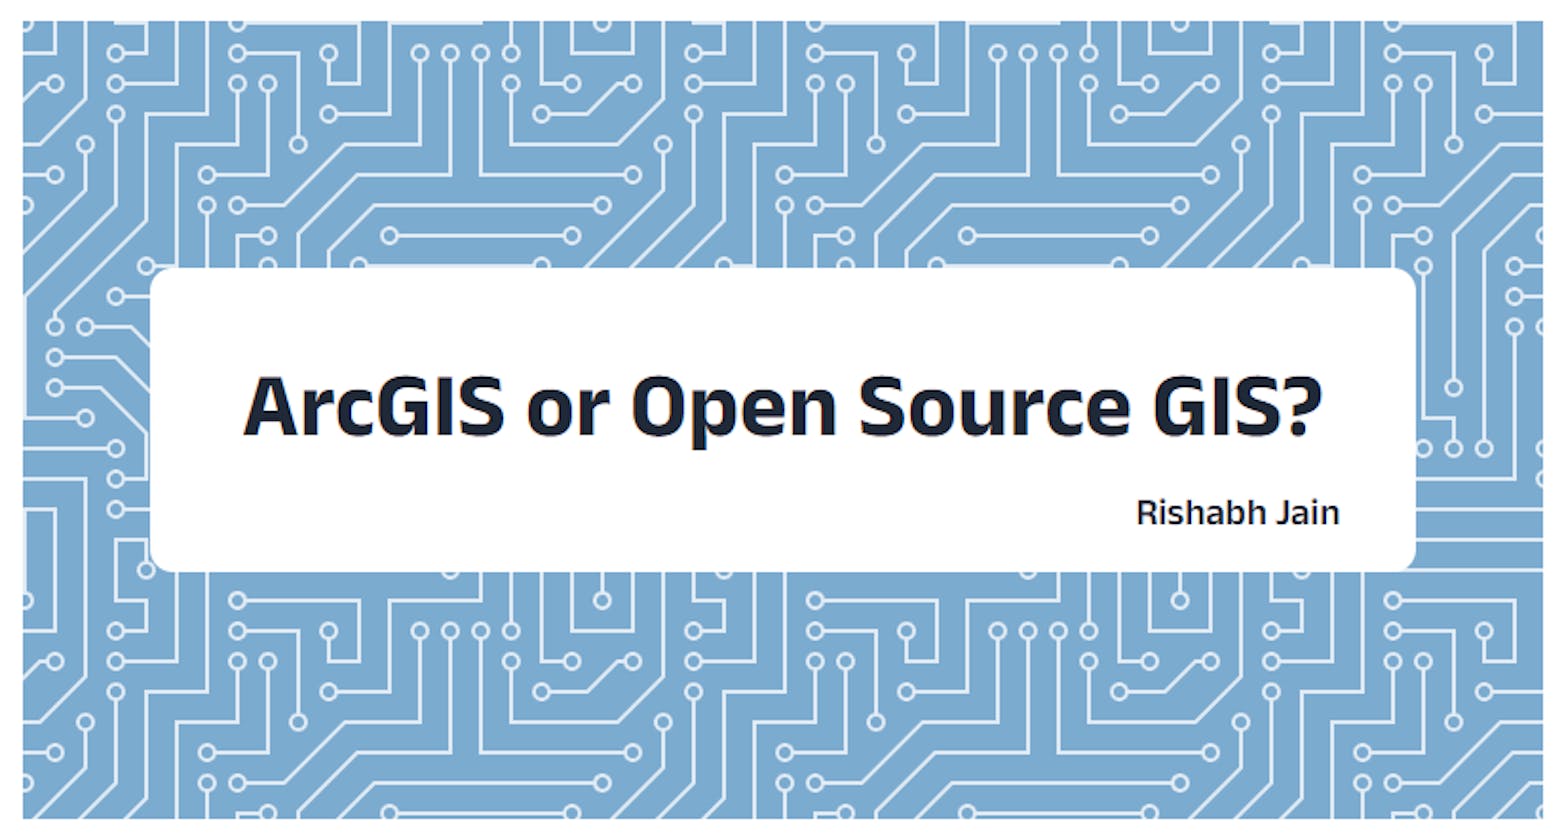 ArcGIS or Open Source GIS?